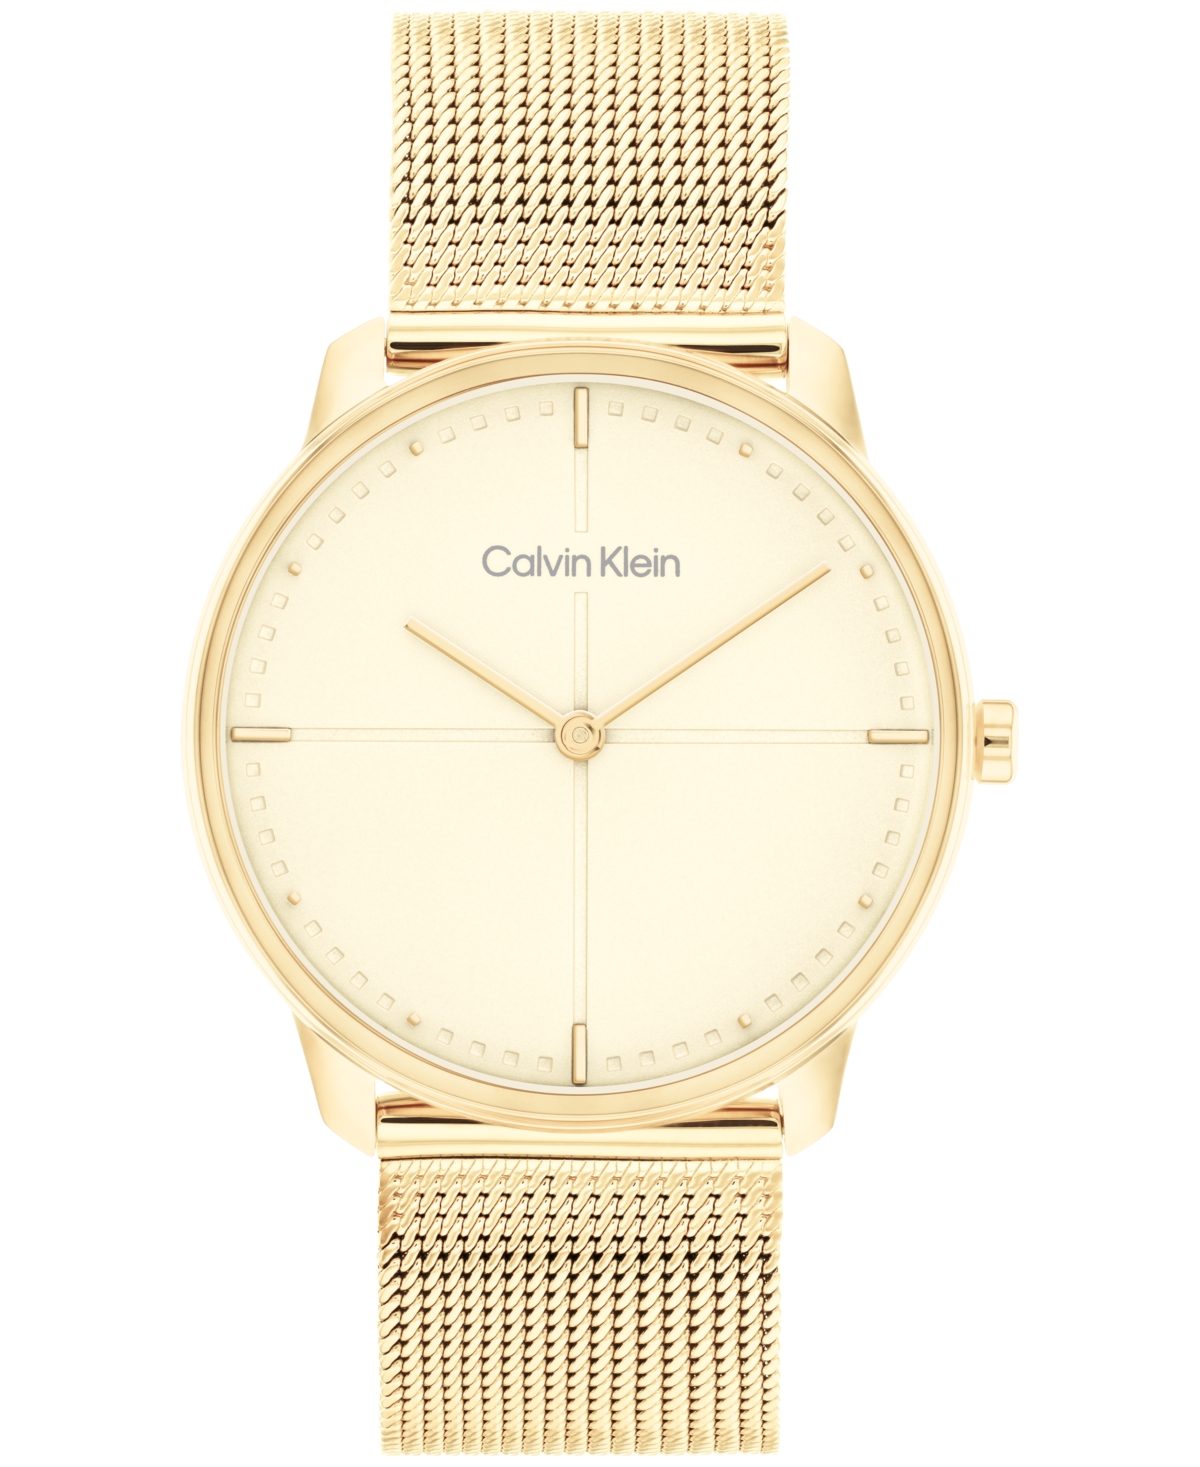 Unisex Gold-Tone Stainless Steel Mesh Bracelet Watch, 35mm - Gold-Tone